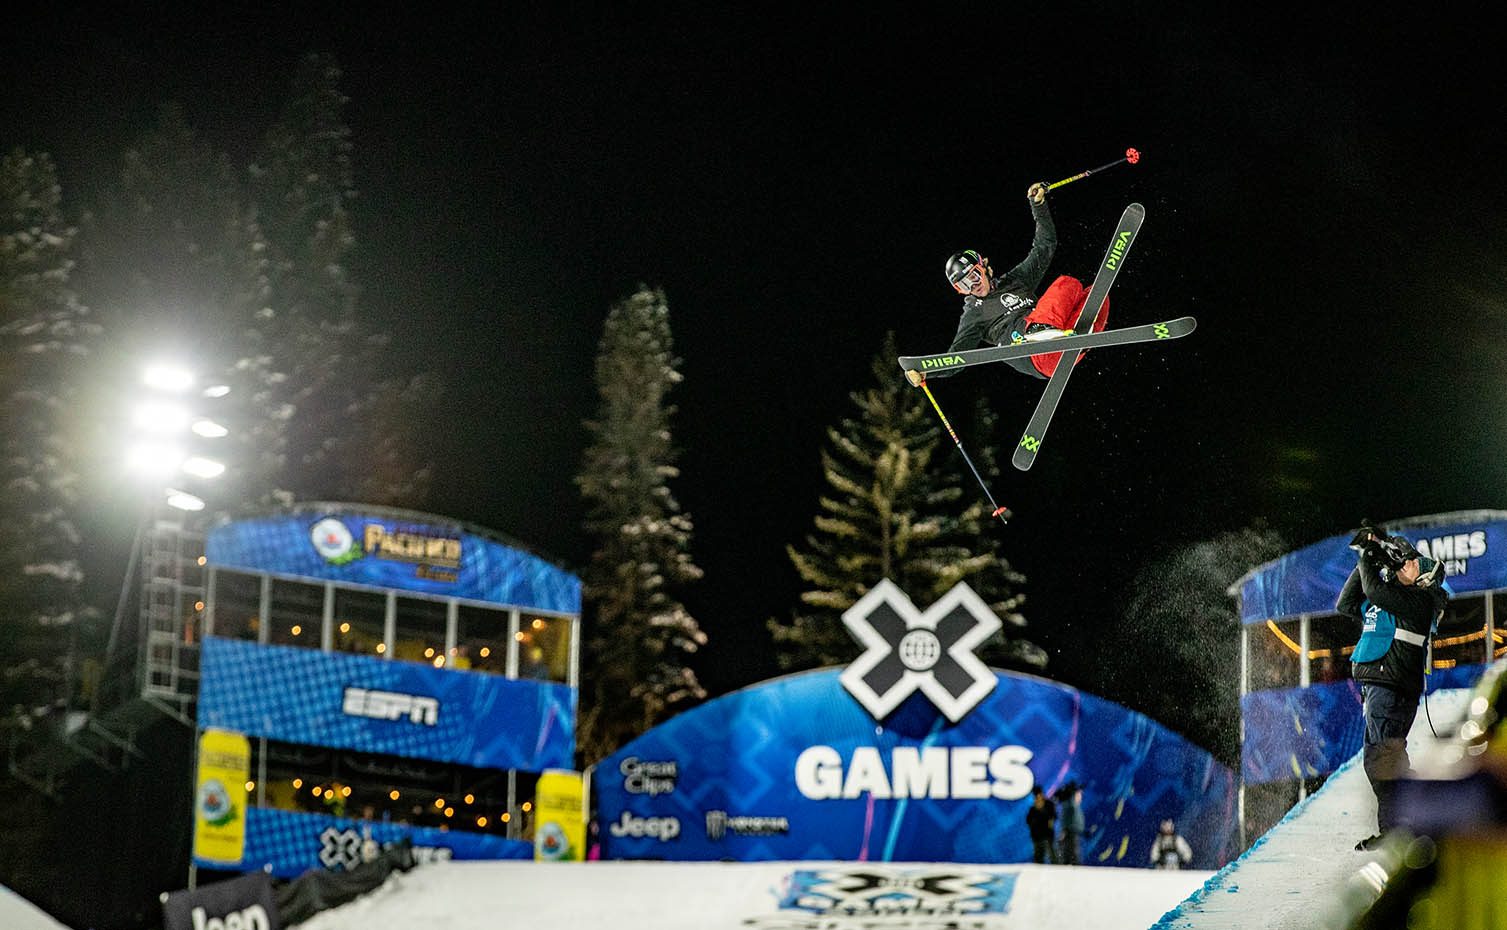 Skier in the halfpipe during X Games Aspen. 